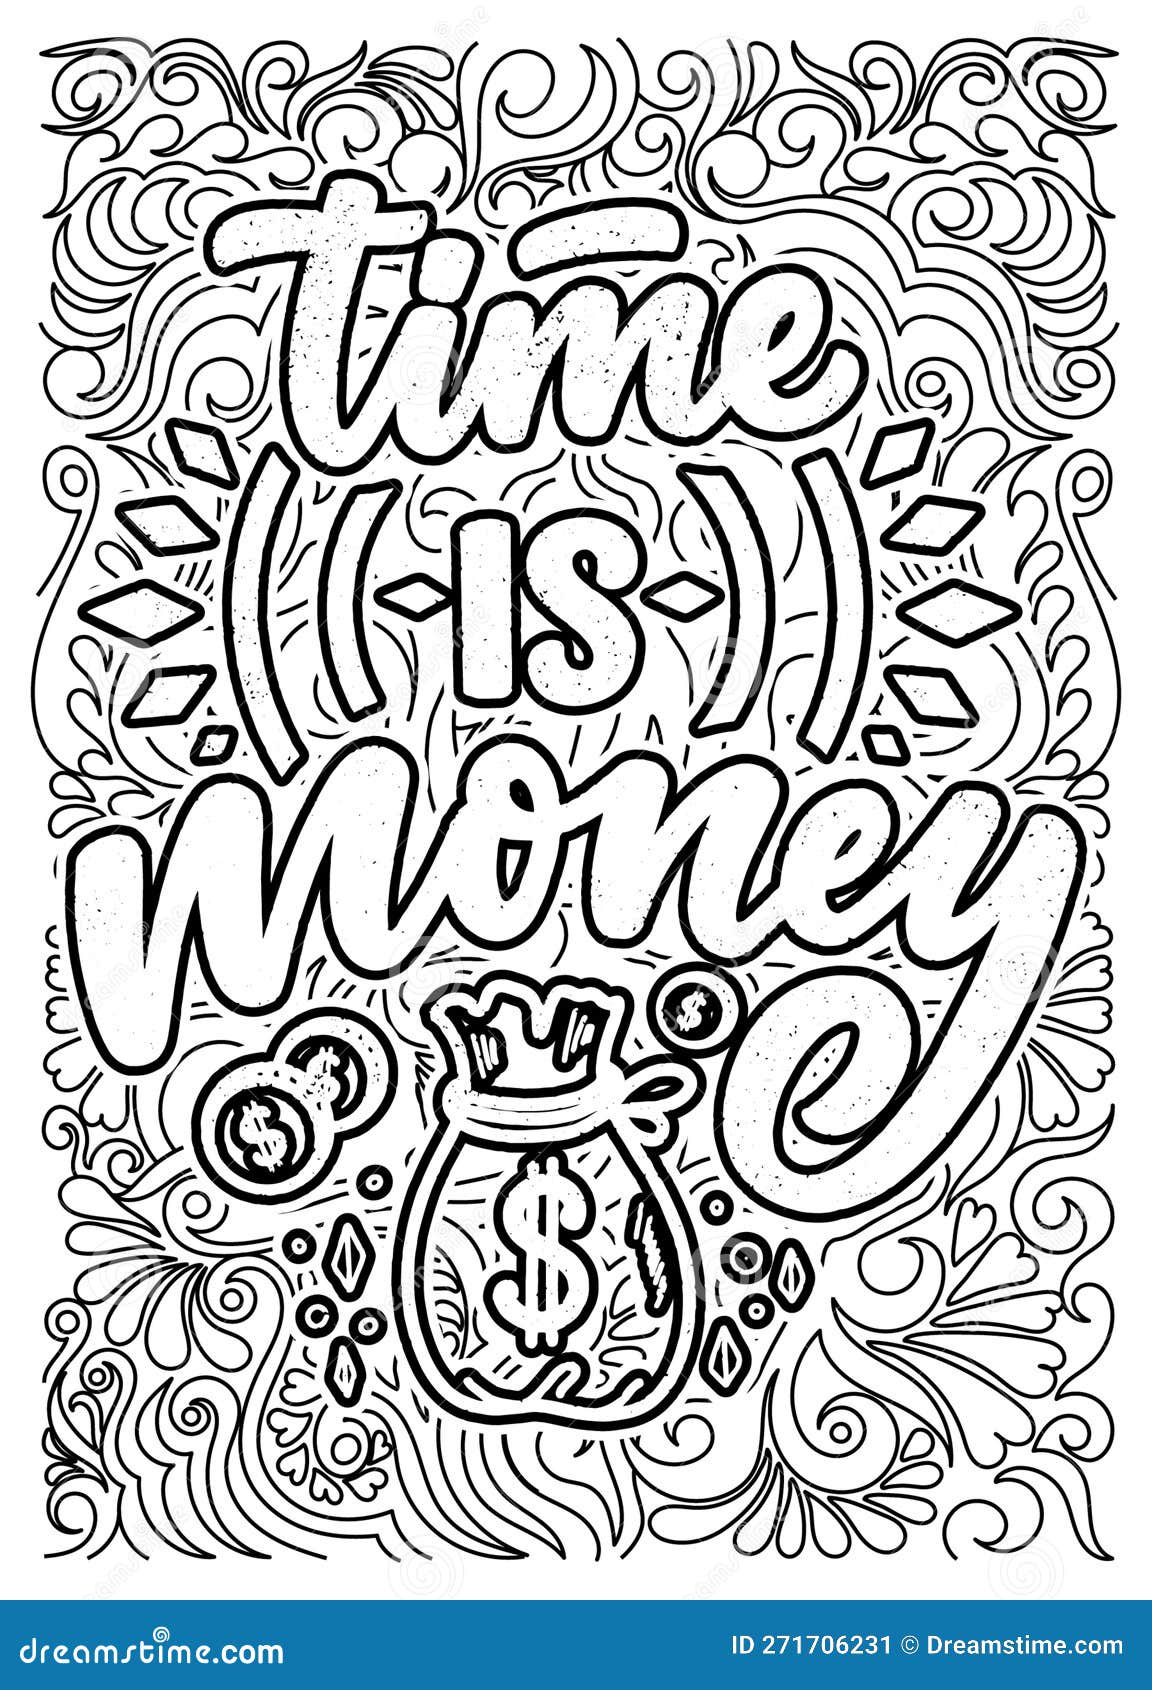 Money motivational quote coloring pages for adults money coloring page design stock illustration